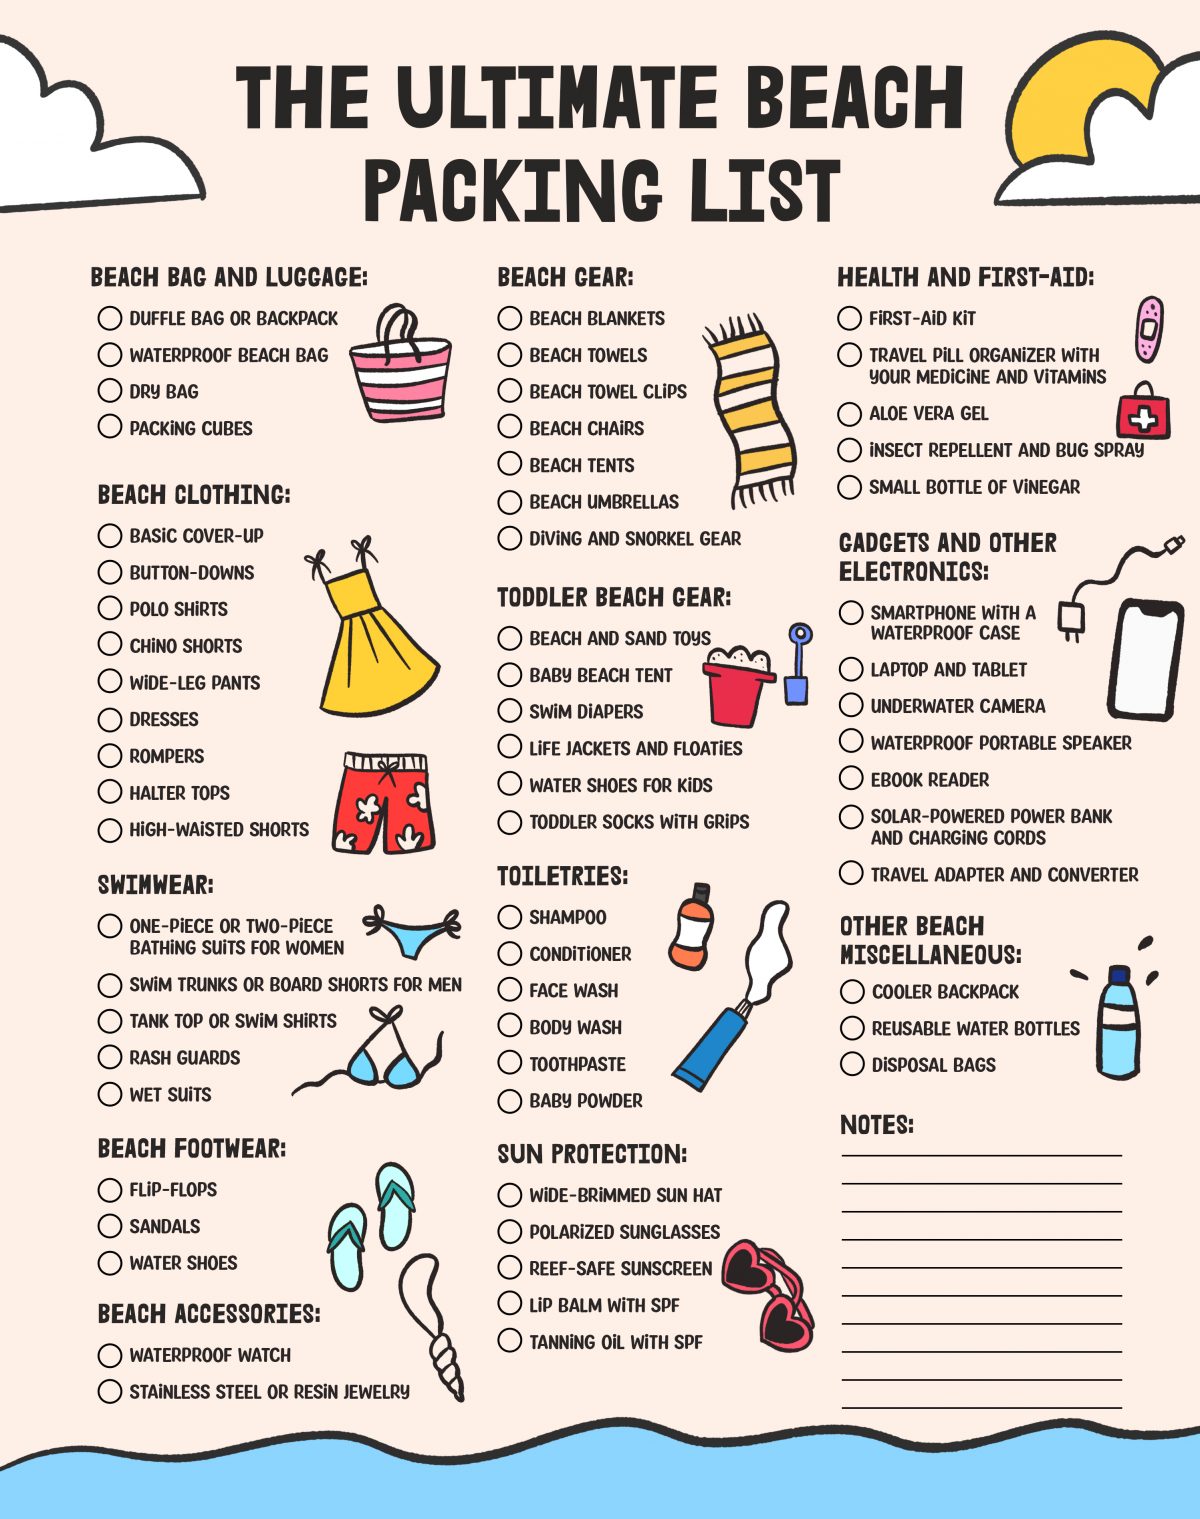 The Ultimate Beach Packing List in 2022 | TouristSecrets